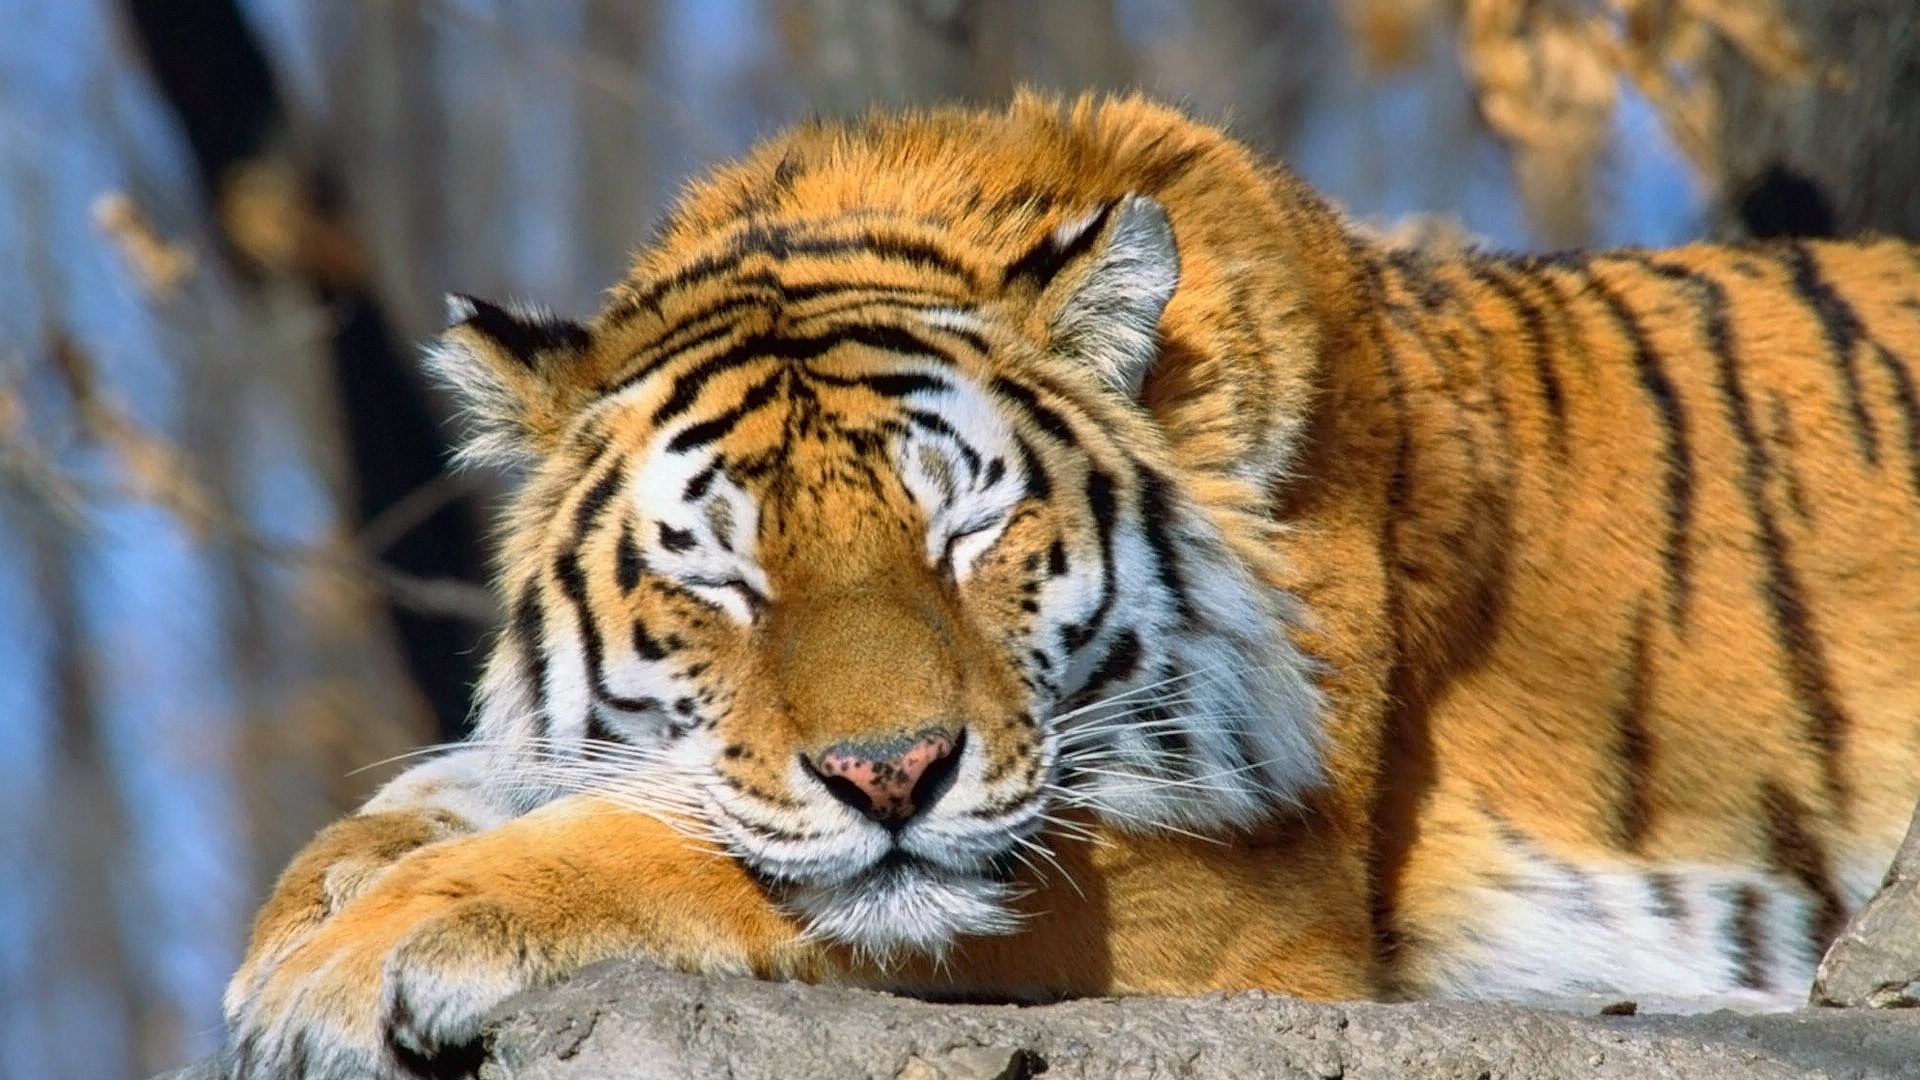 Sleeping Tiger 1920x1080 Wallpapers,Tiger 1920x1080 Wallpapers ...